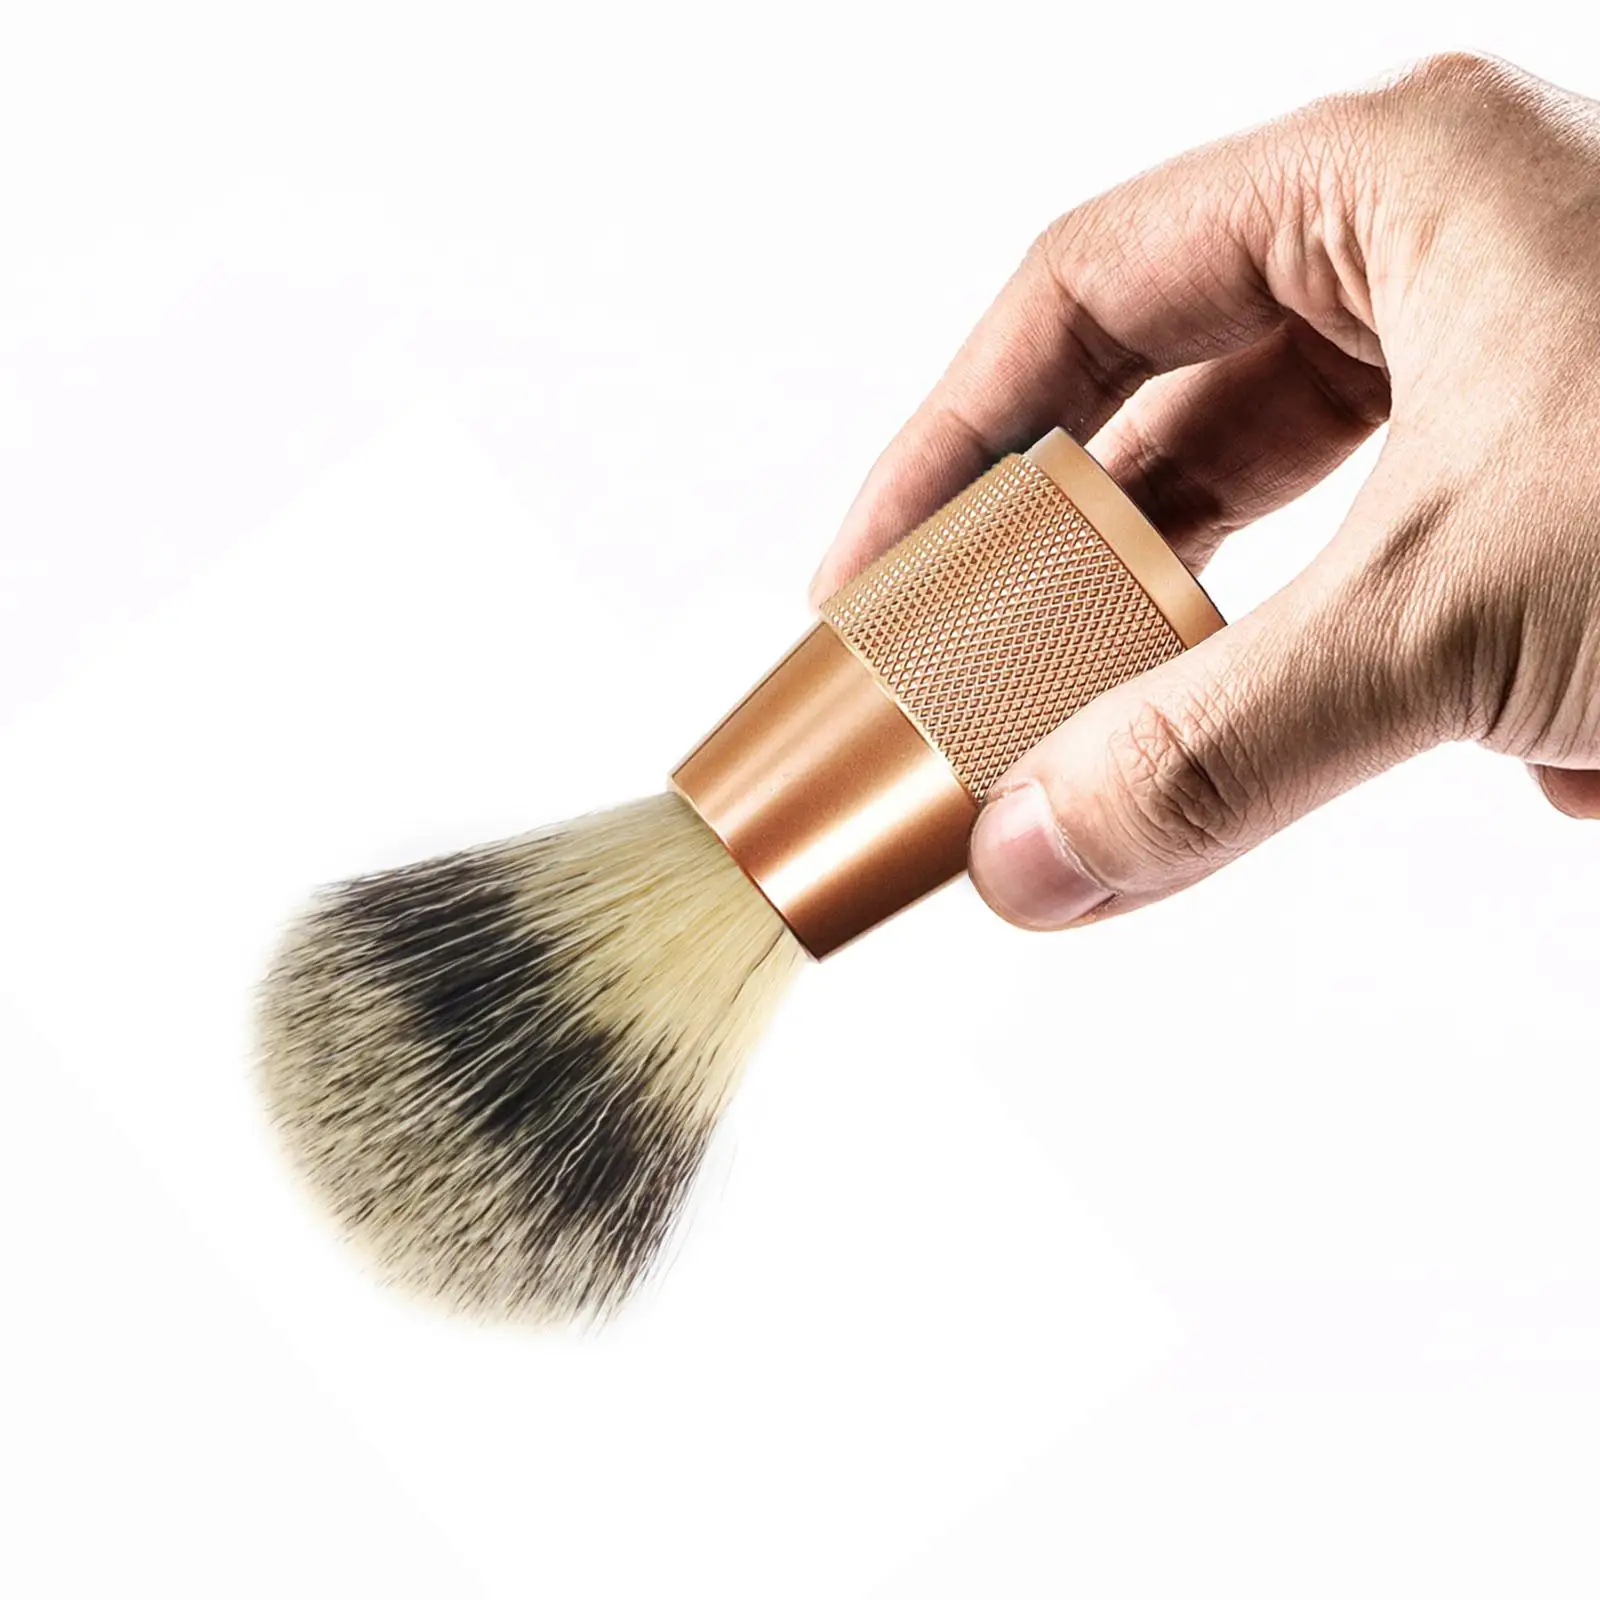 Man Shaving Brush Shaving Accessory Birthday Gift Durable Handled Length 4.3inch Professional Comfortable Face Hair Cleaning